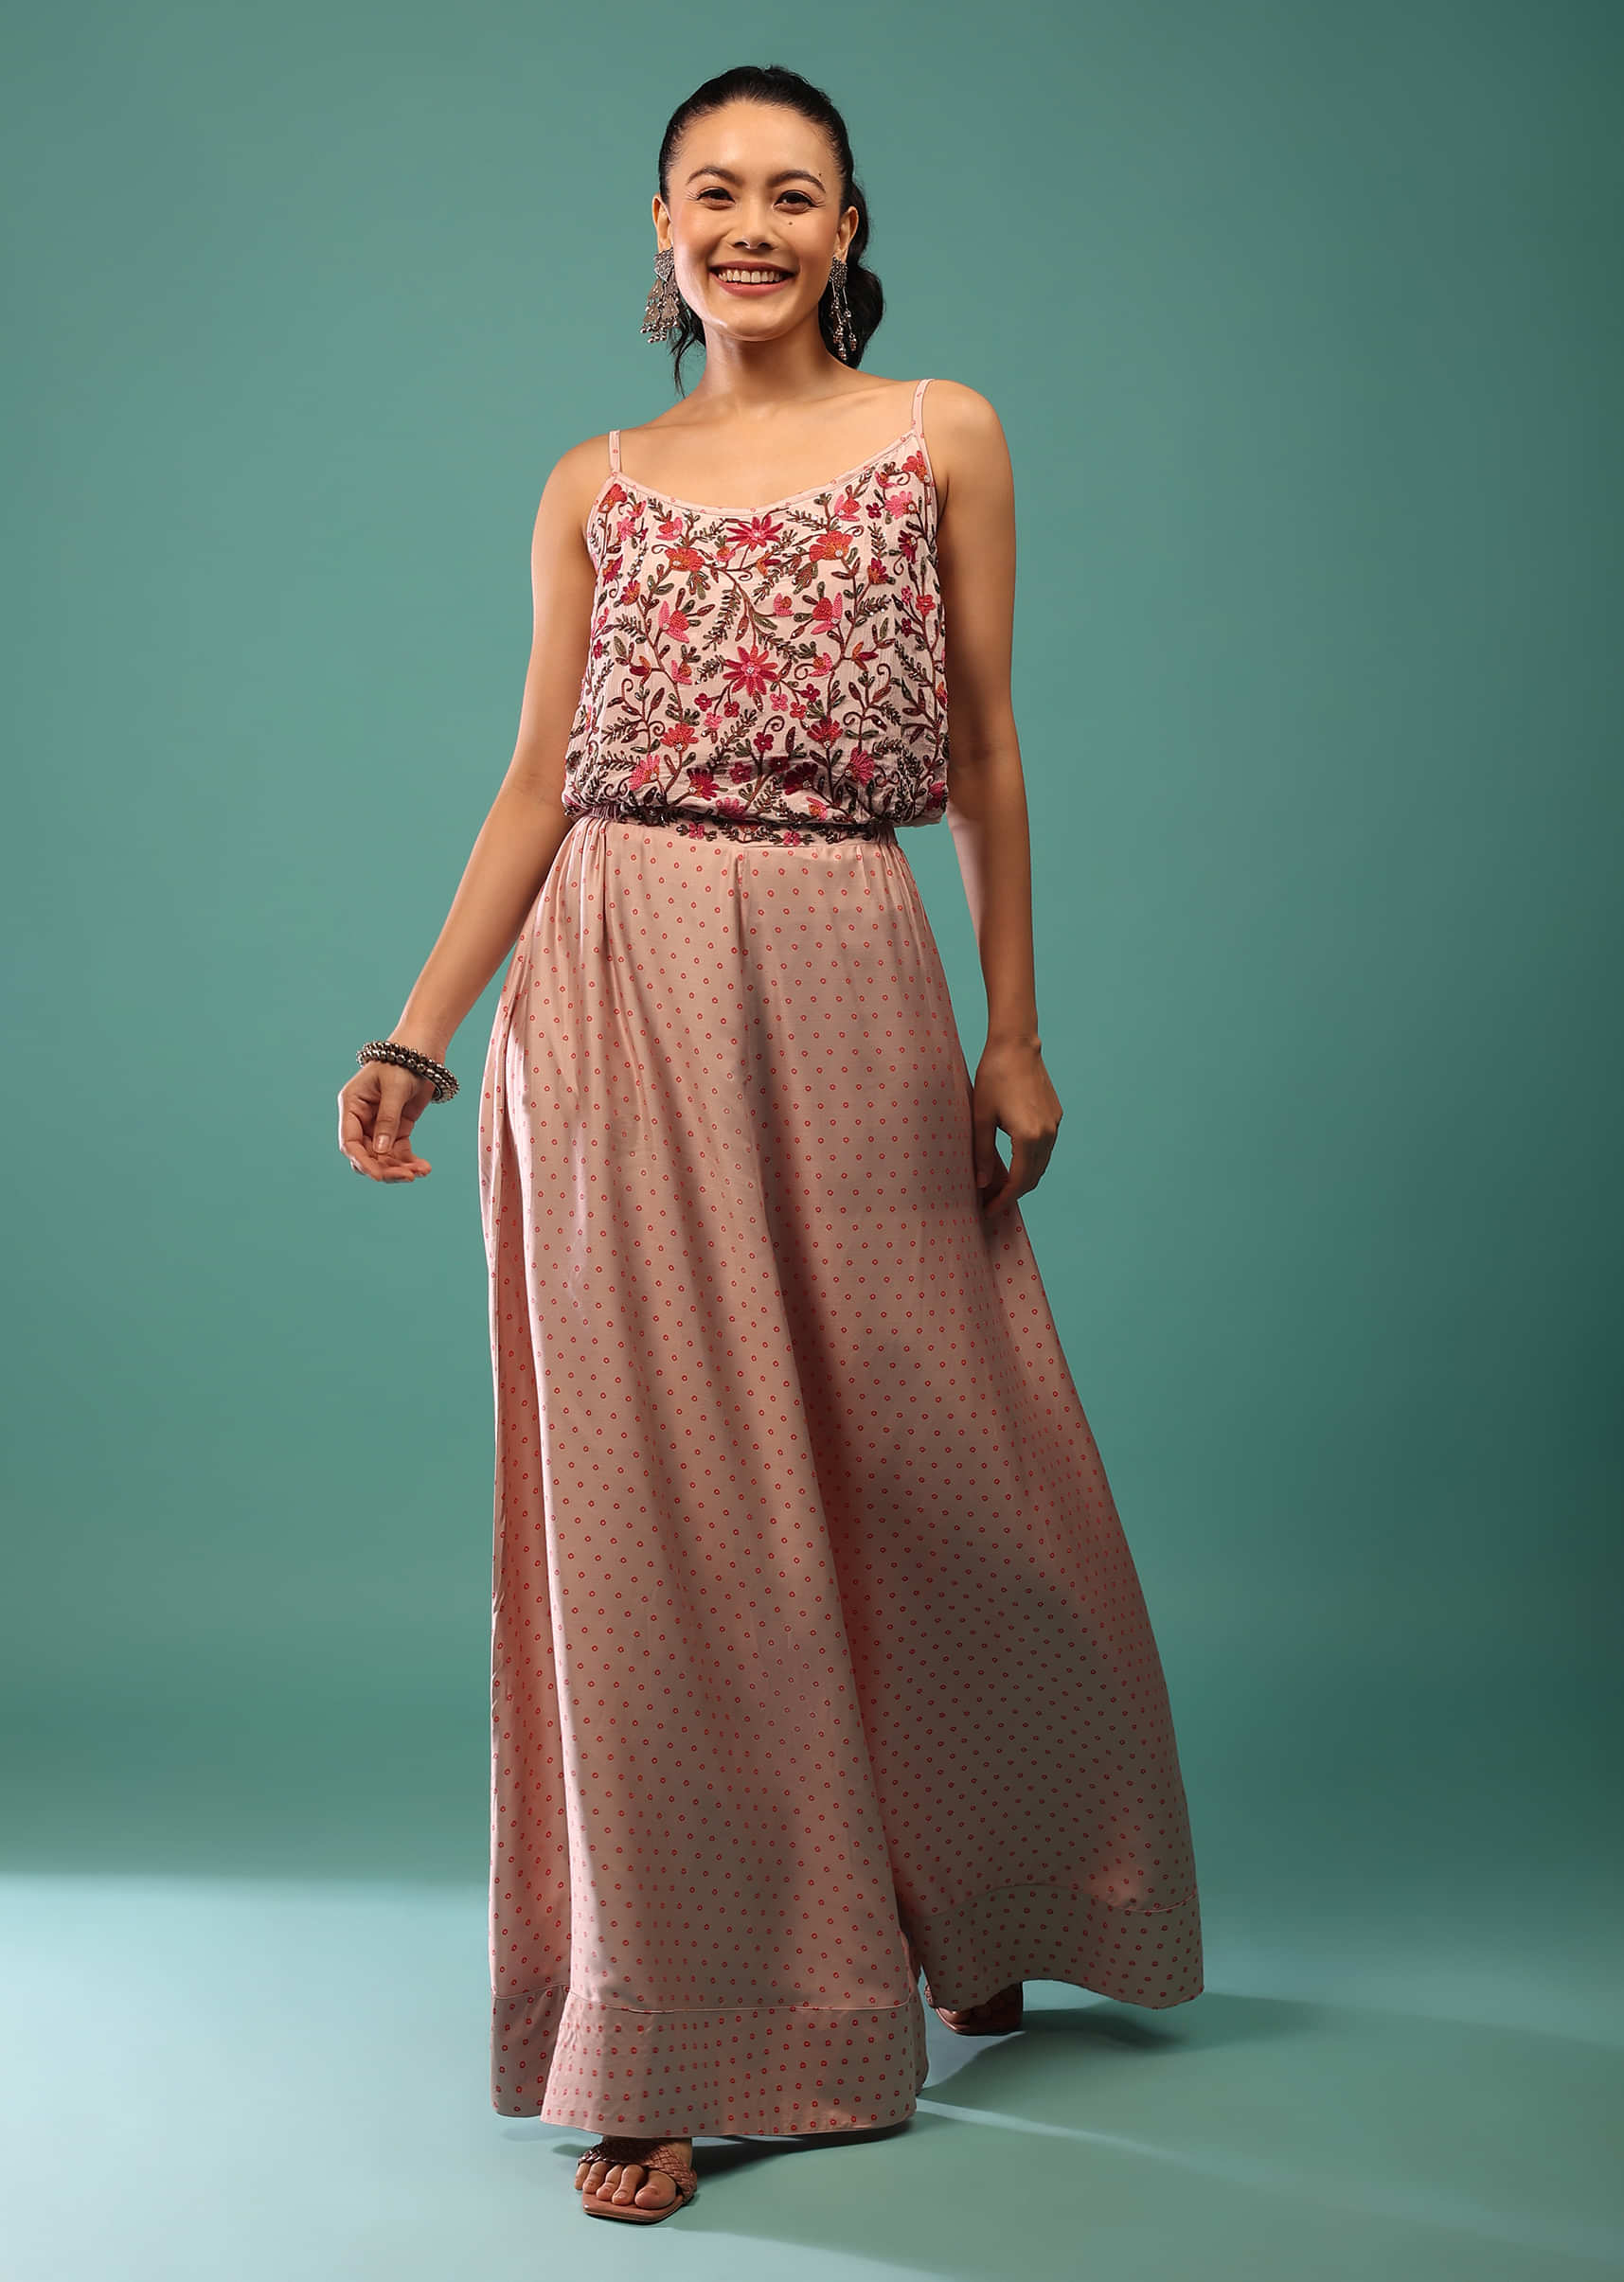 Pink Jumpsuit With Thread, Beads And Sequins In Floral Patterns